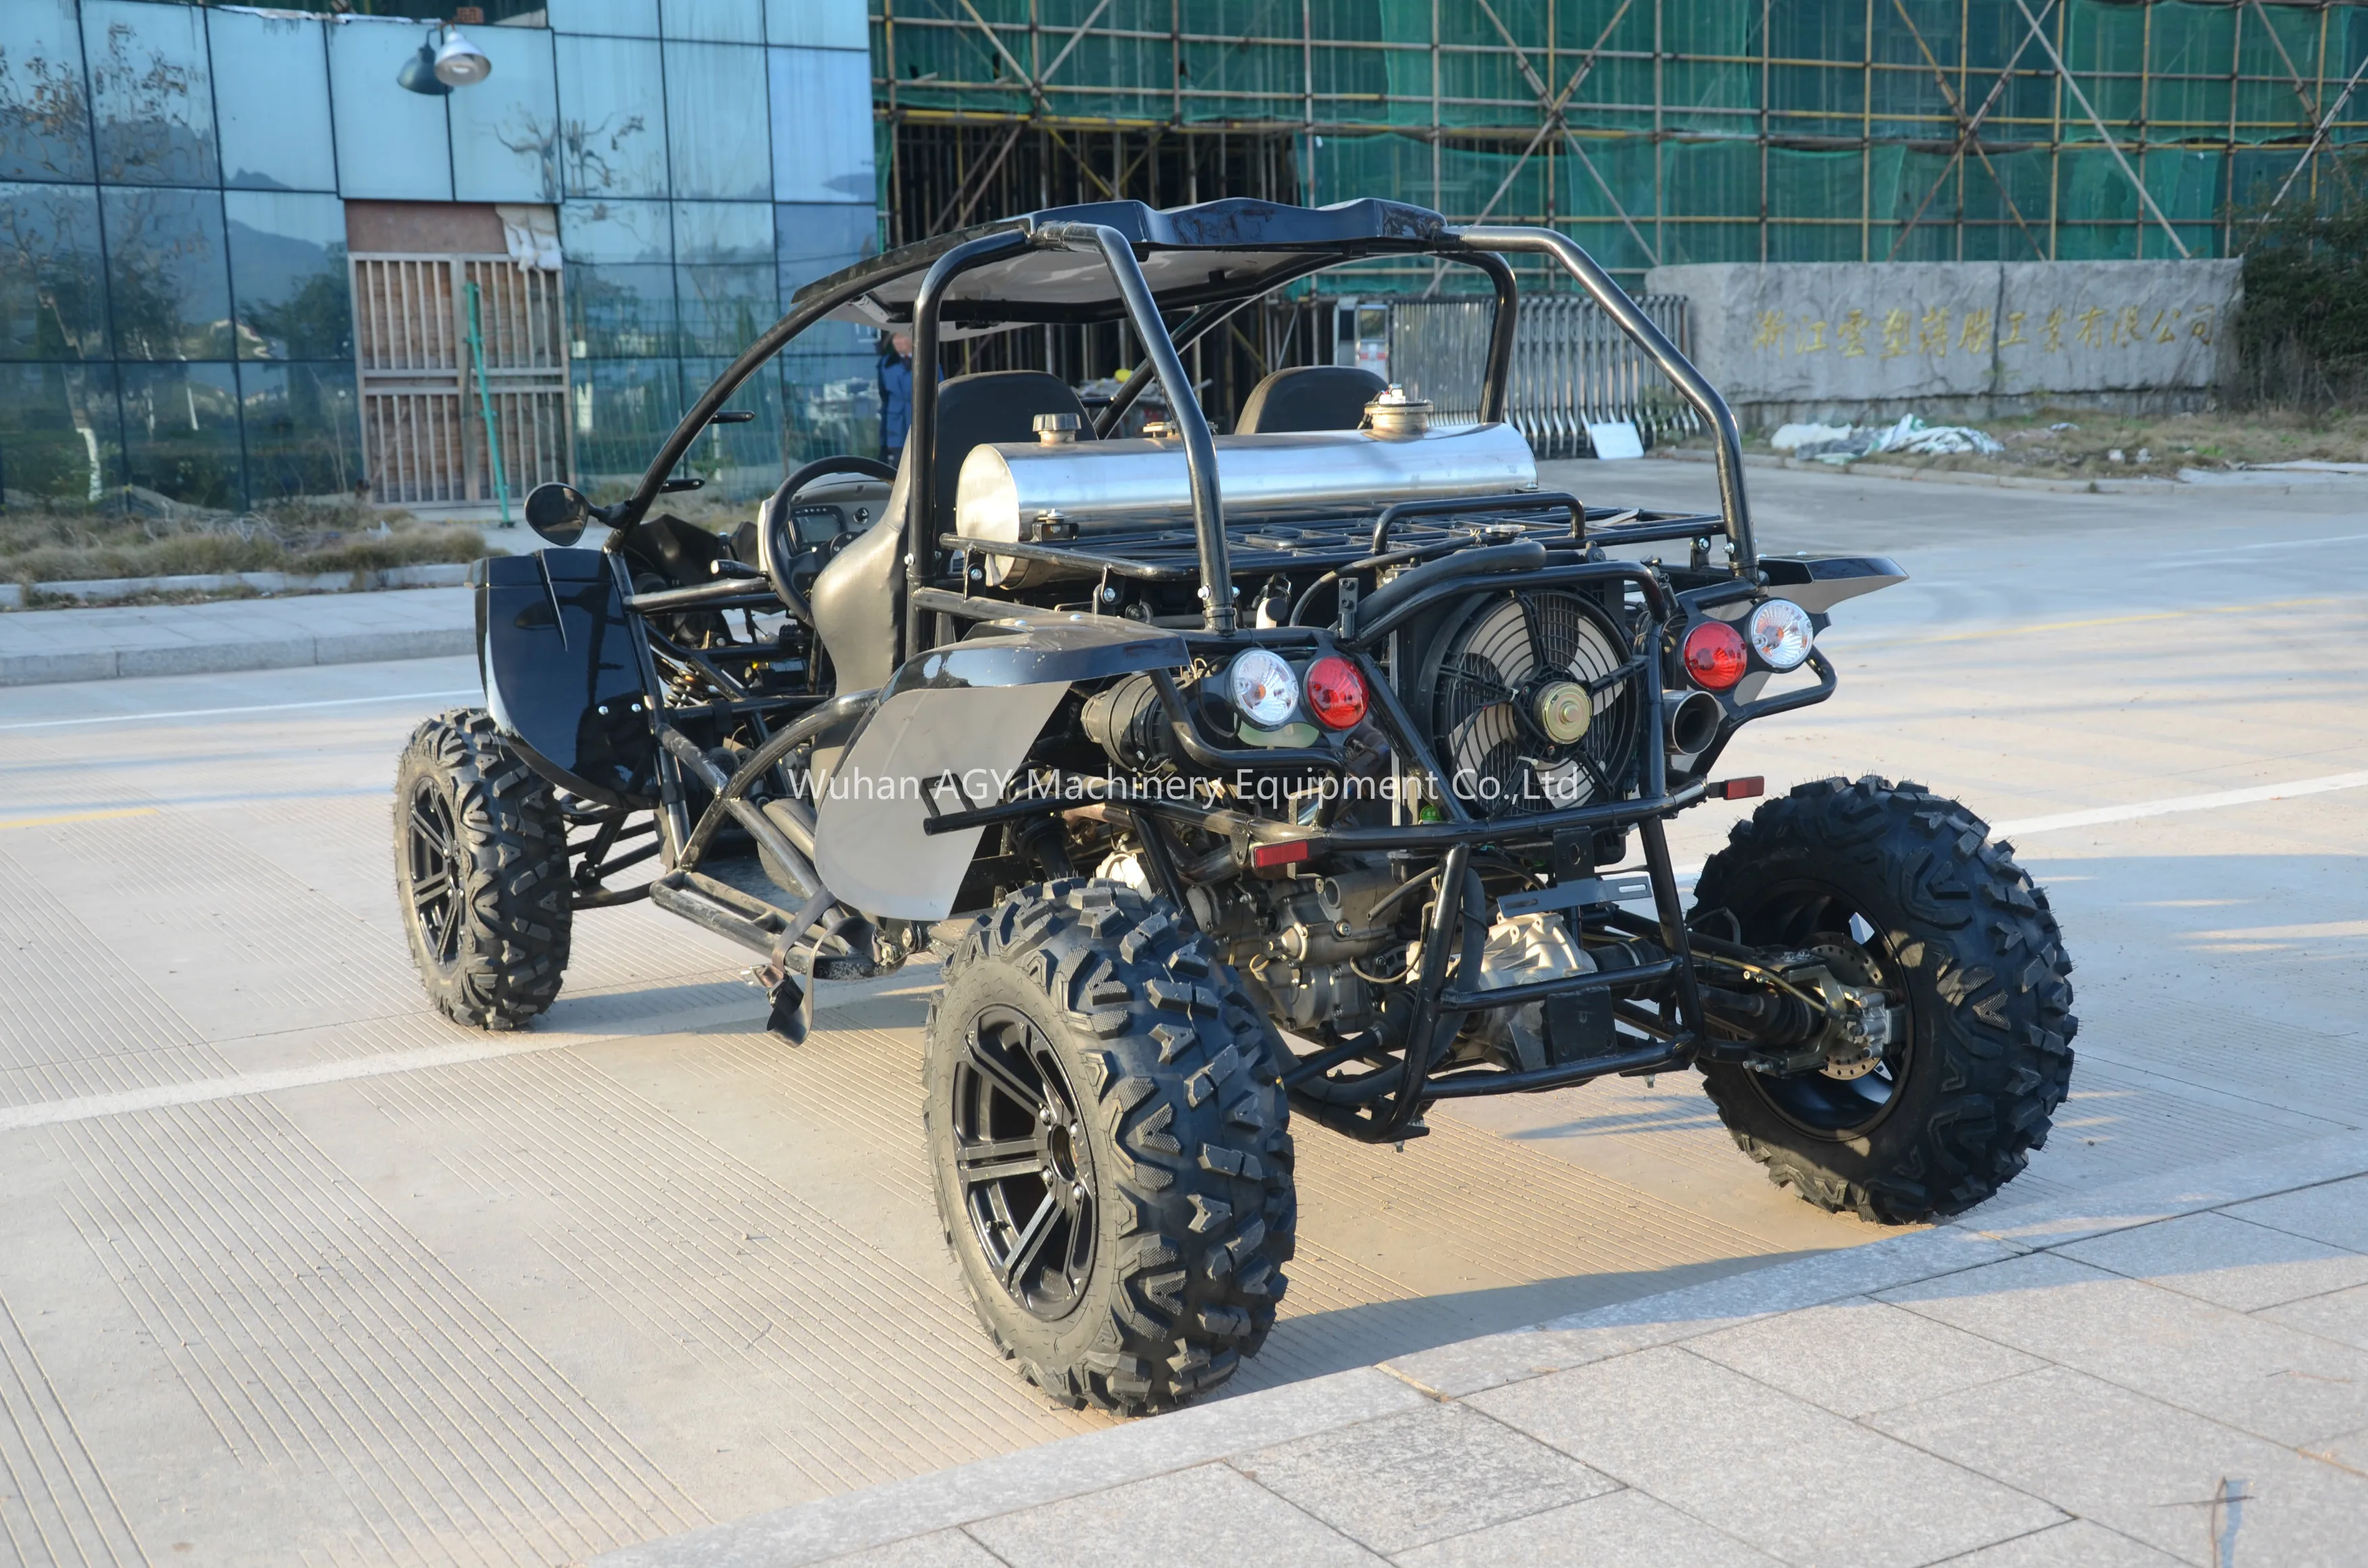 AGY side by sides 4x4 1100cc cheap utv Products from Wuhan AGY